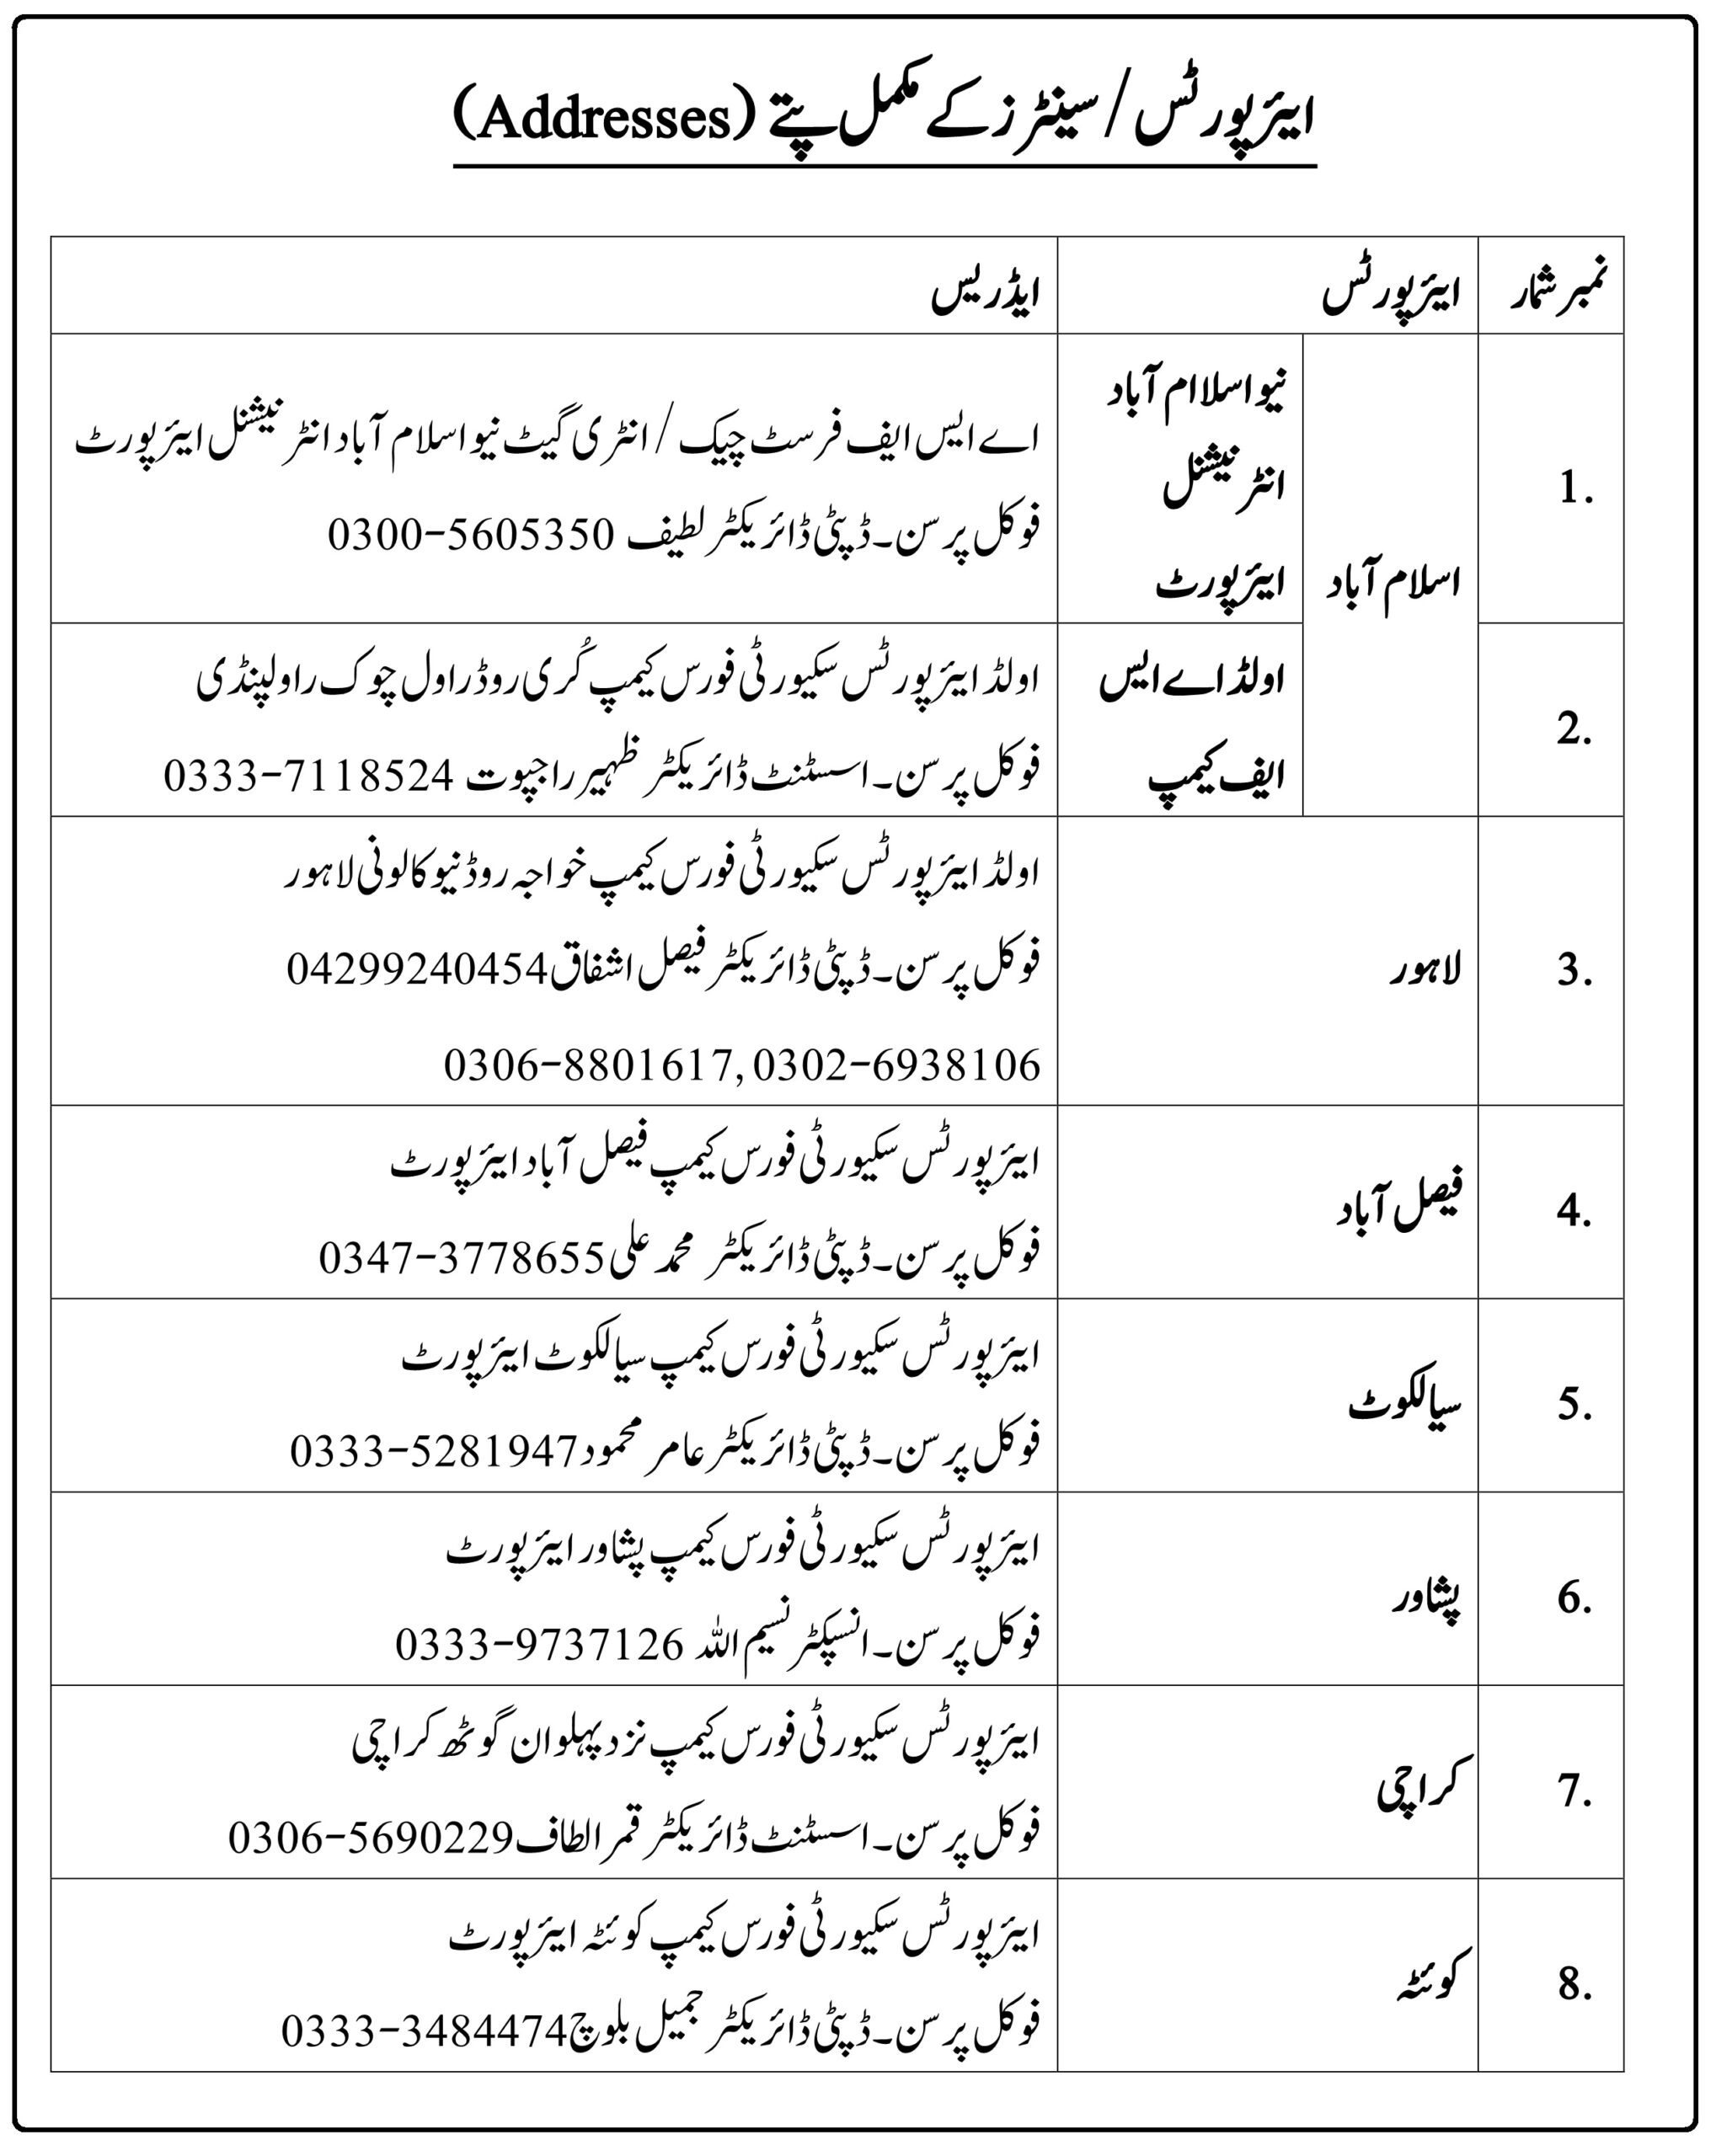 Airport Security Force Jobs Application Centers in Pakistan